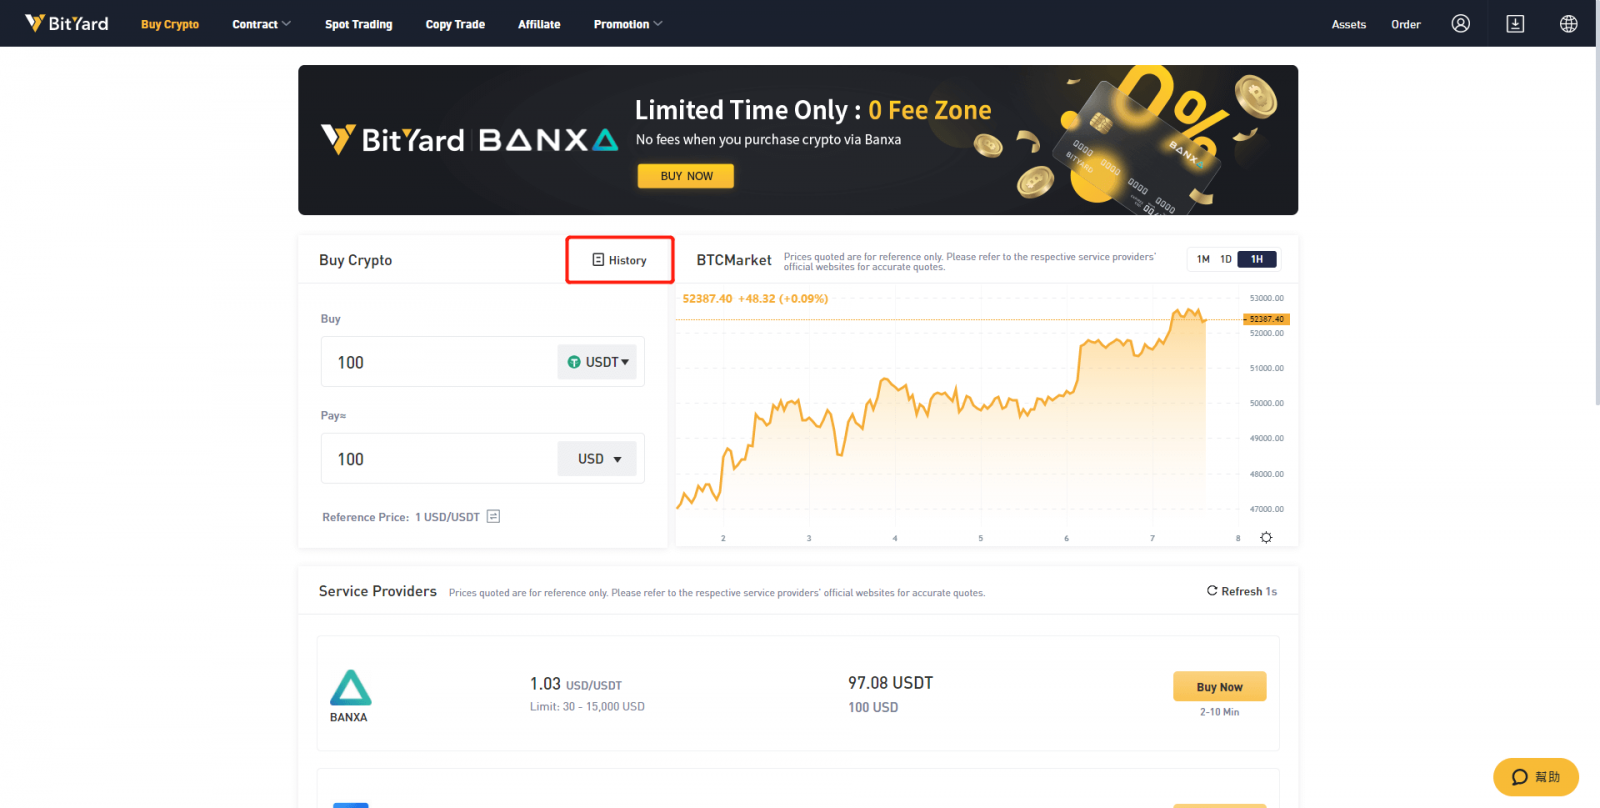 How to Start BitYard Trading in 2021: A Step-By-Step Guide for Beginners